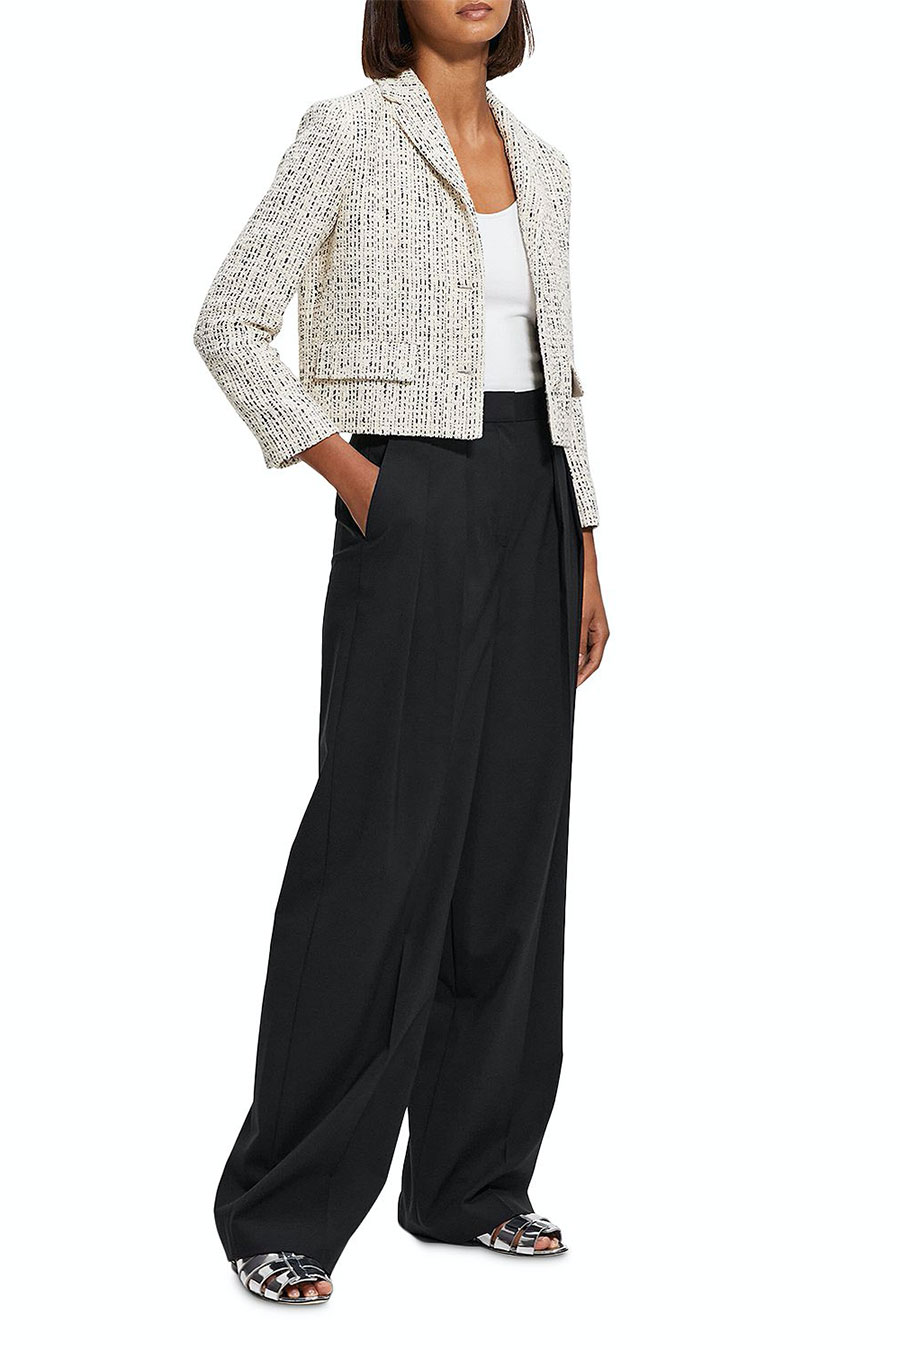 Wide Pants and Metallic Shoes